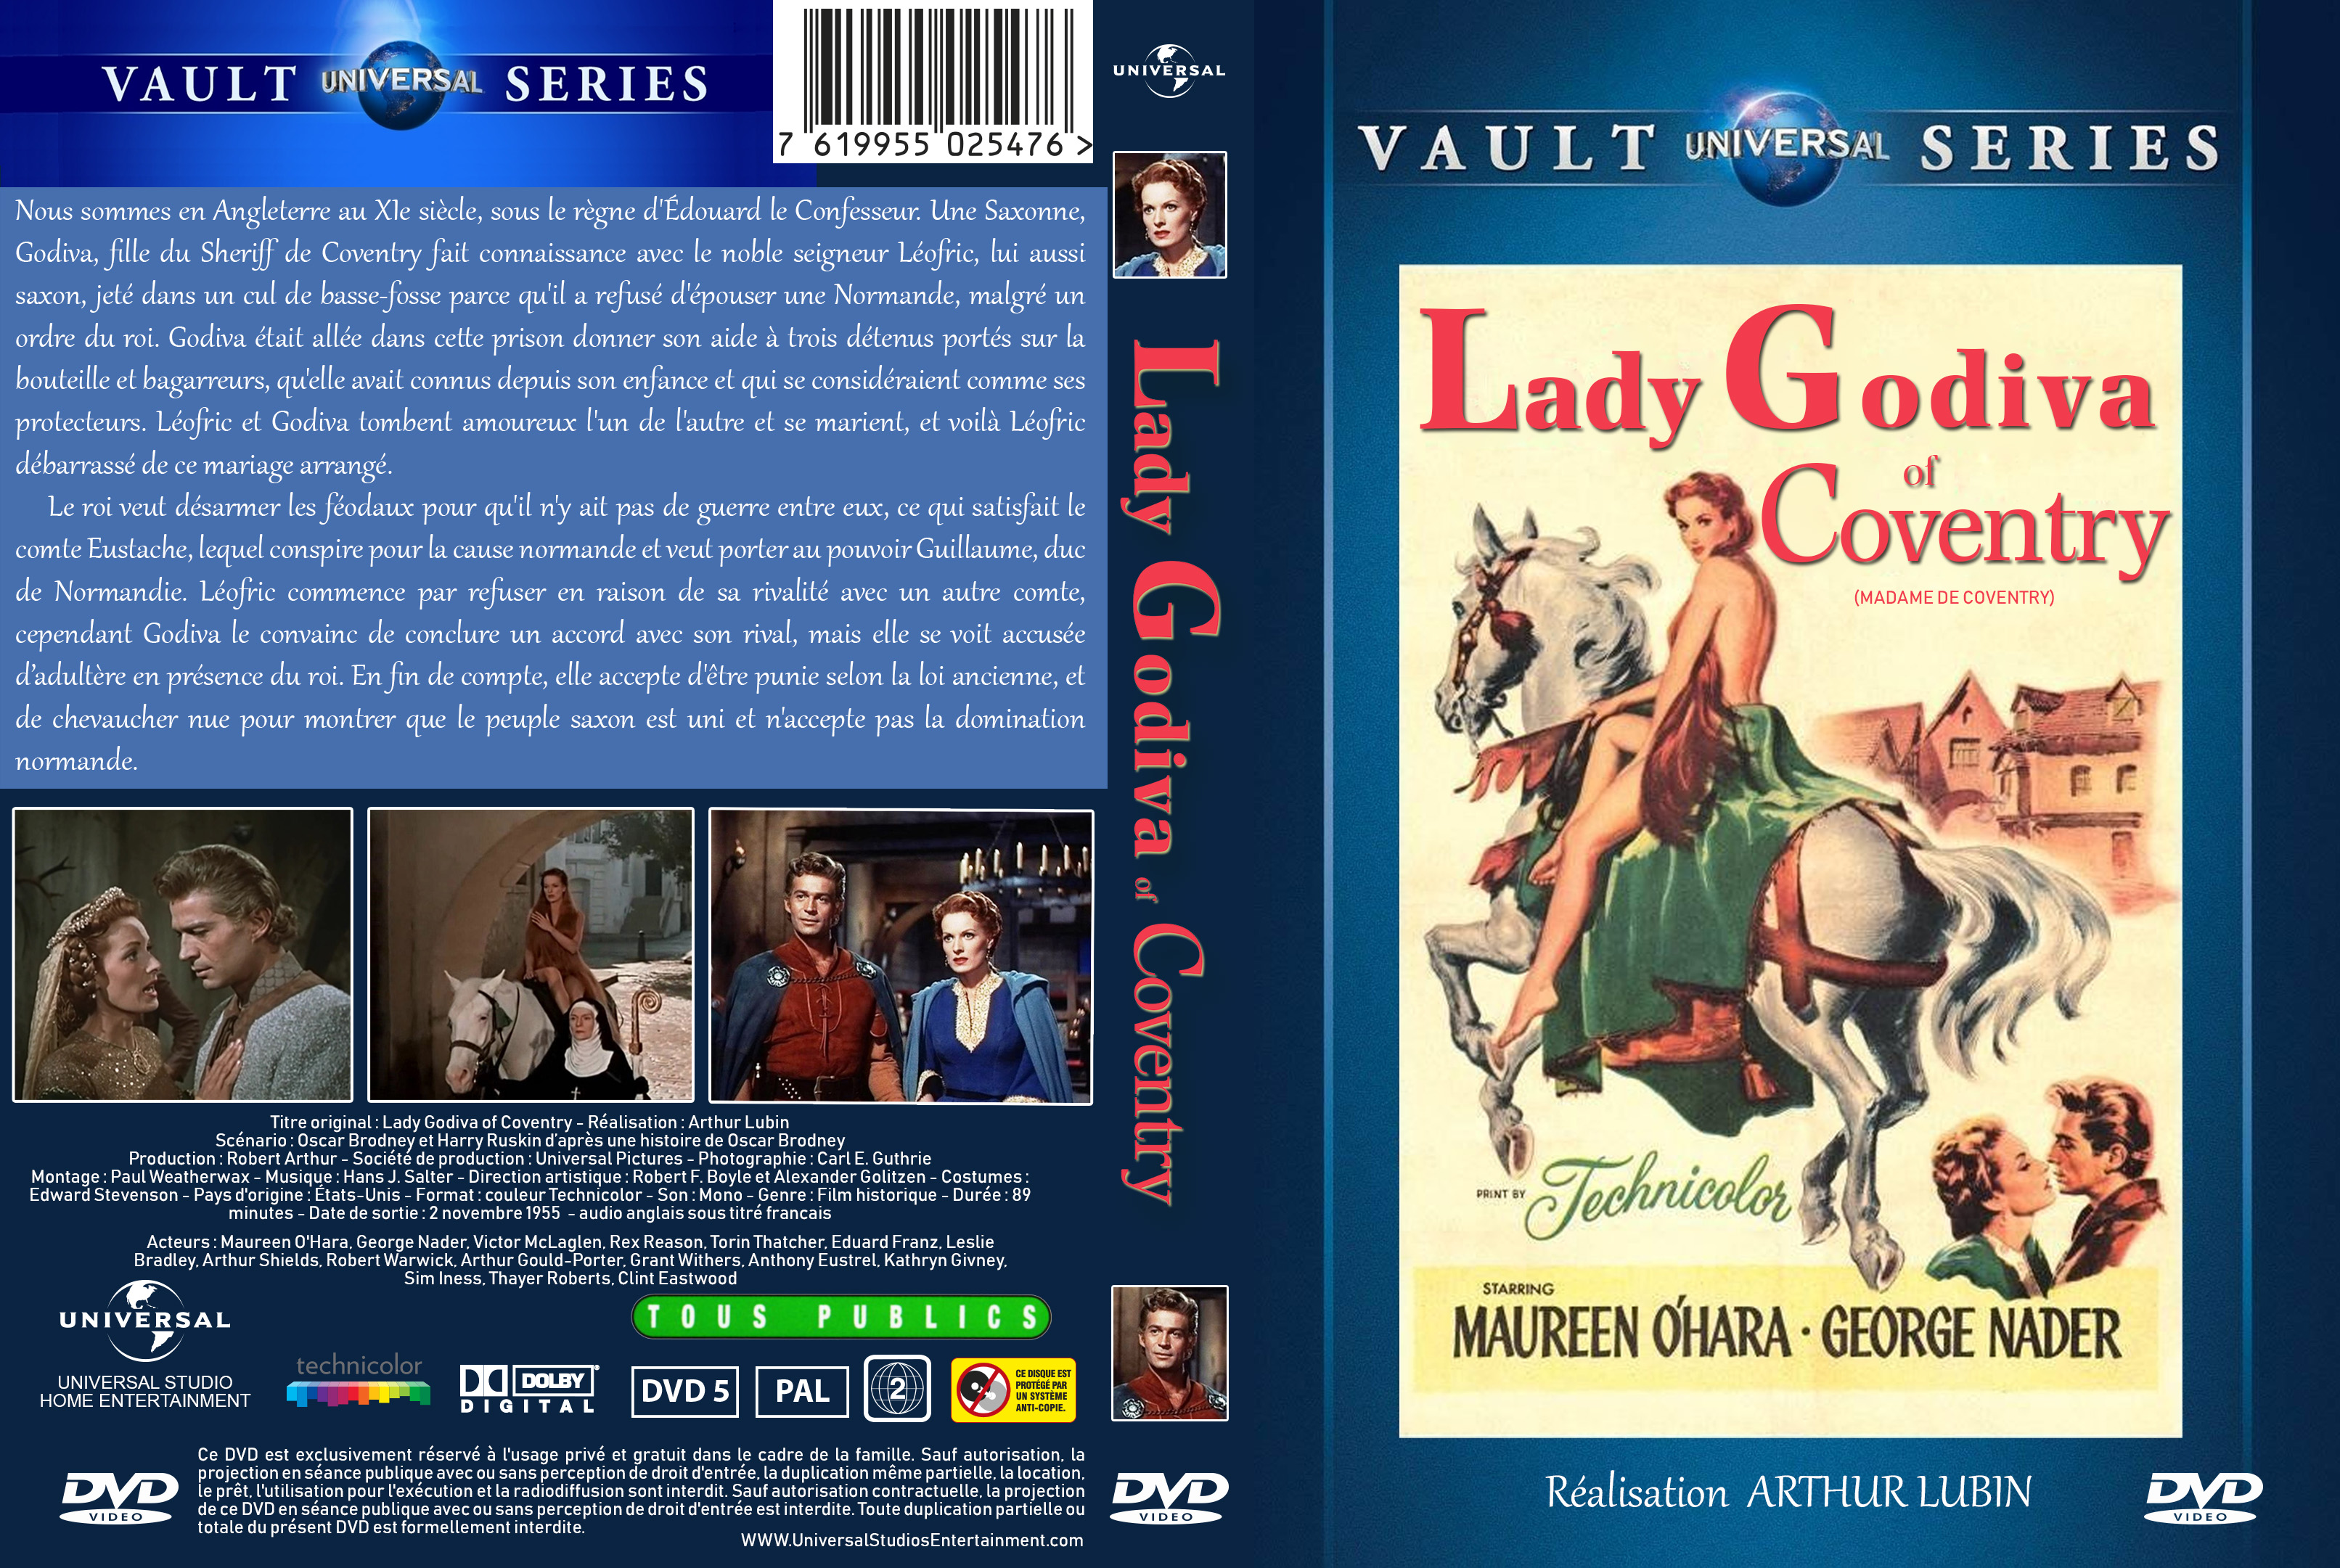 Jaquette DVD Lady Godiva of Coventry custom